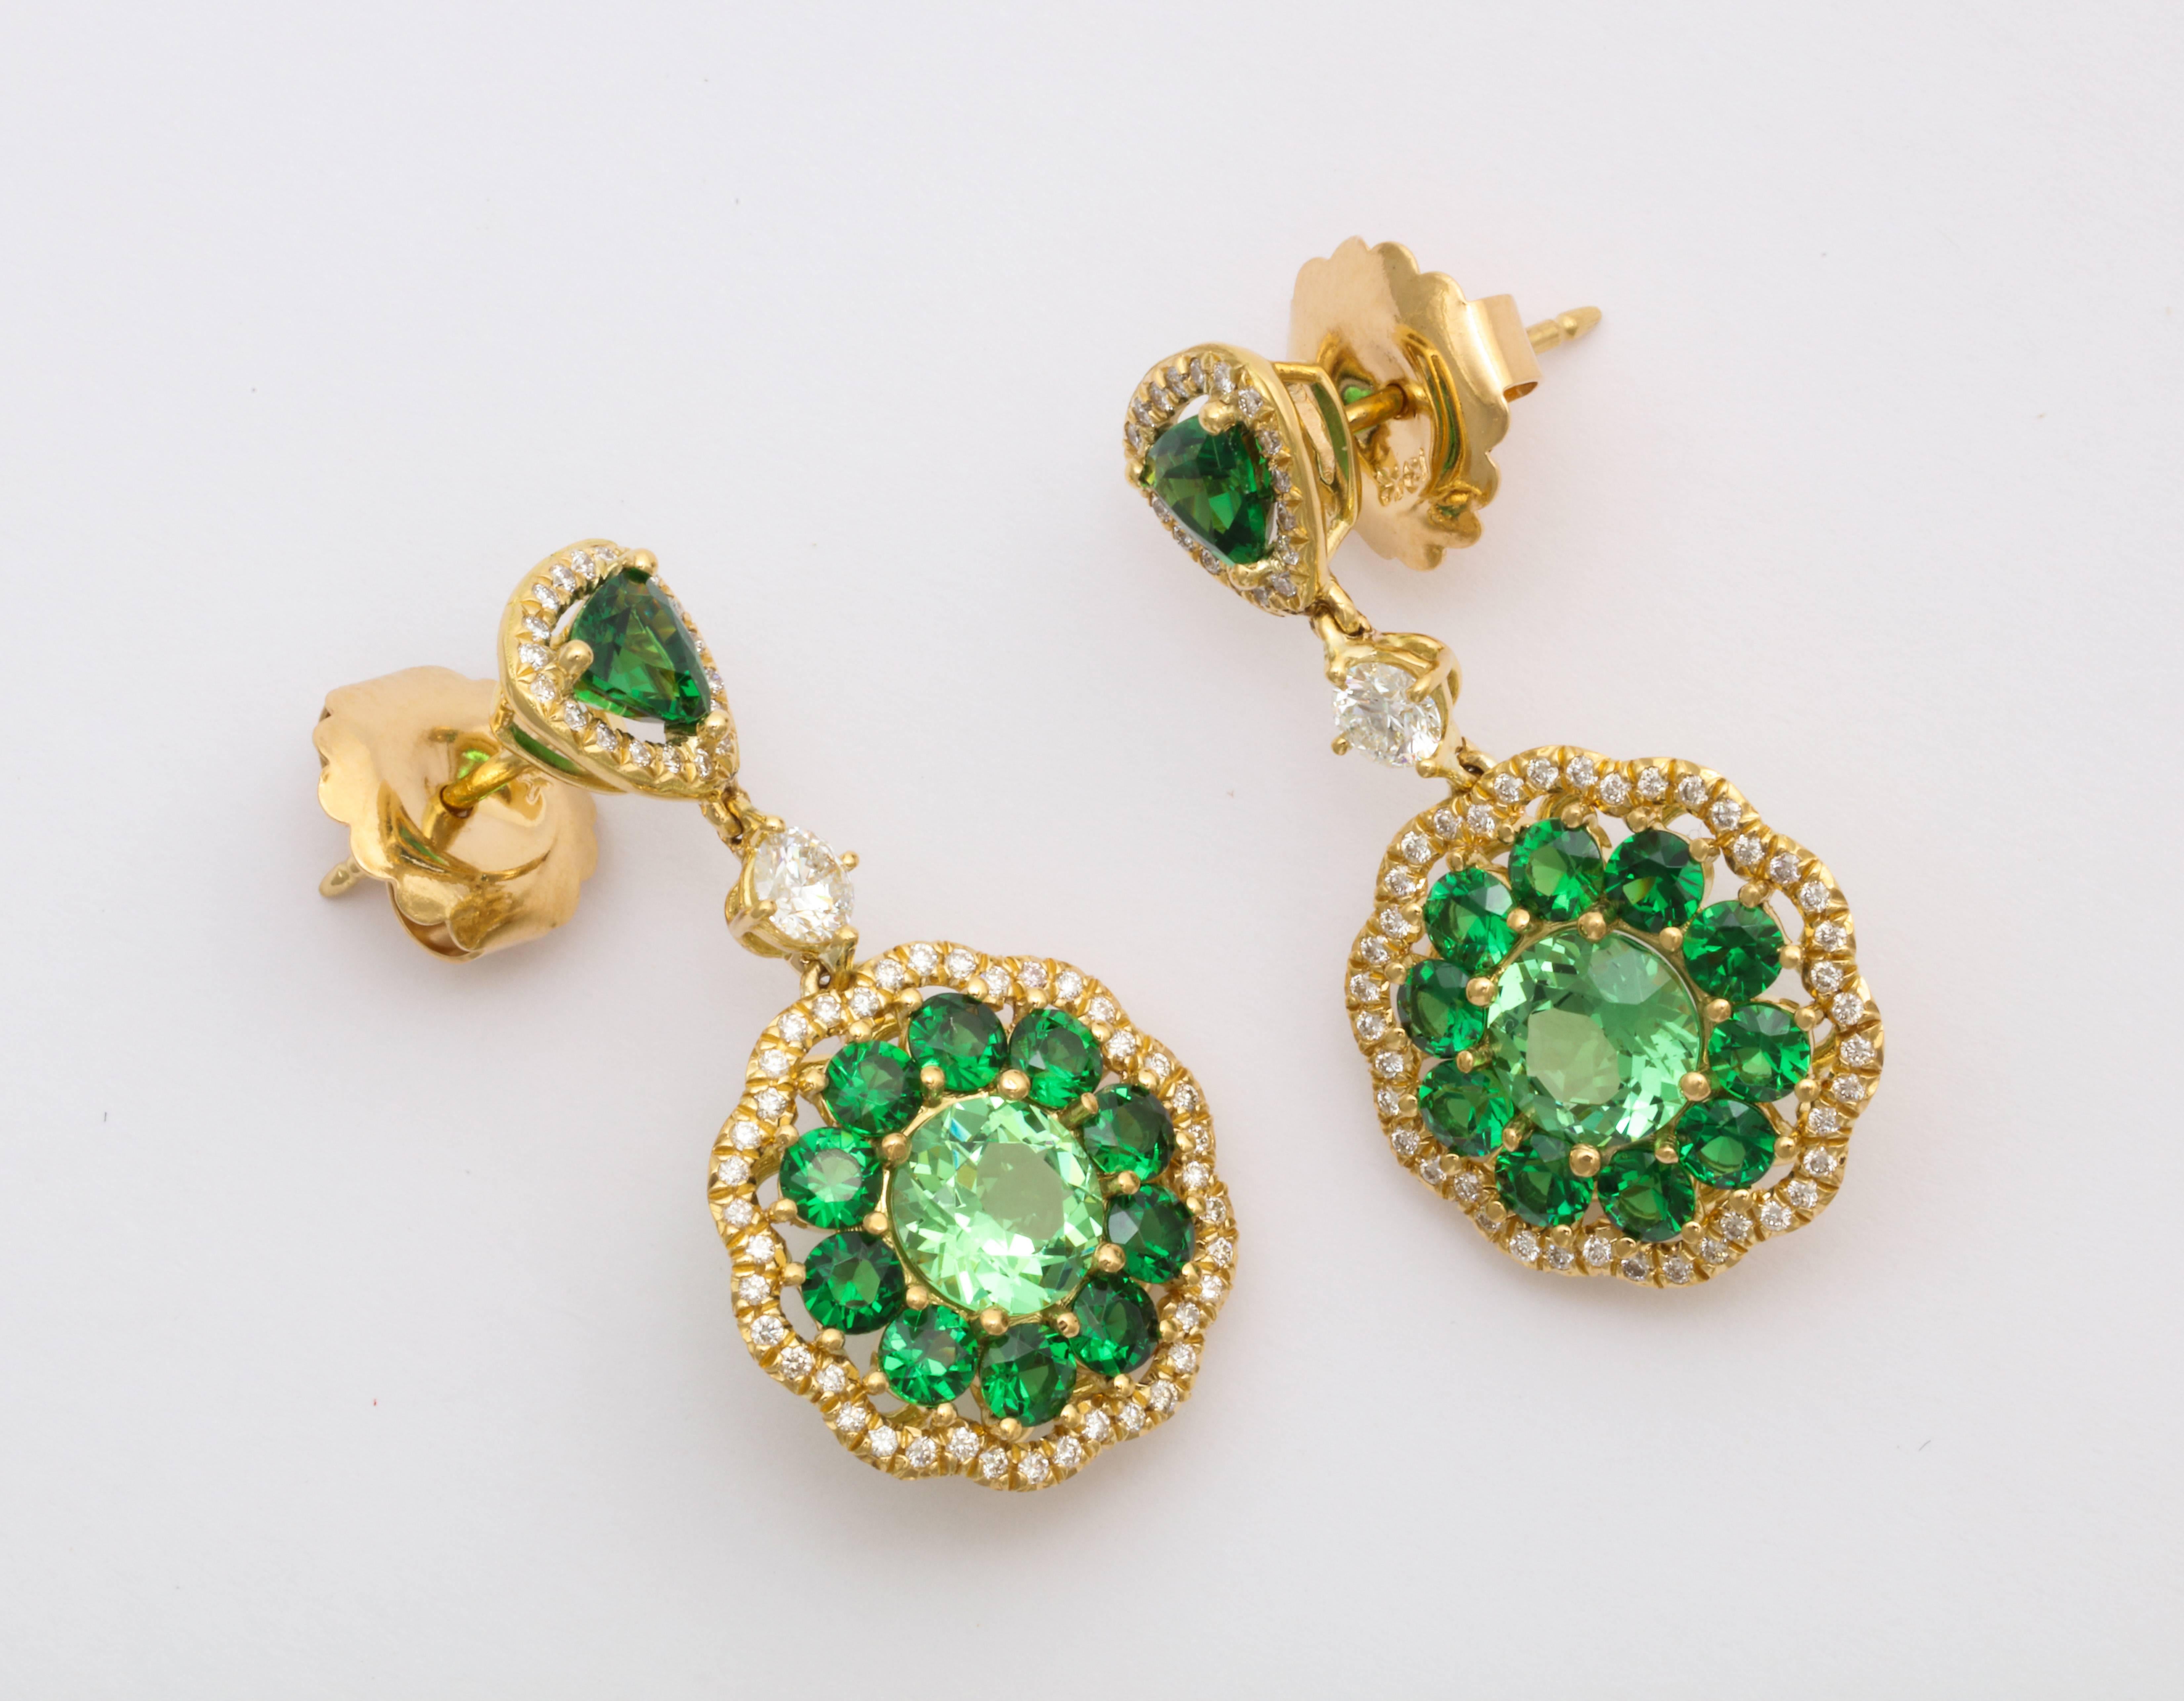 Say it with color! These 18K Yellow Gold earrings by world renowned designer Donna Vock are composed of the finest quality Tsavorite (garnet), in three shades of the most vivid, festive green and accented with superb round brilliant diamonds. 